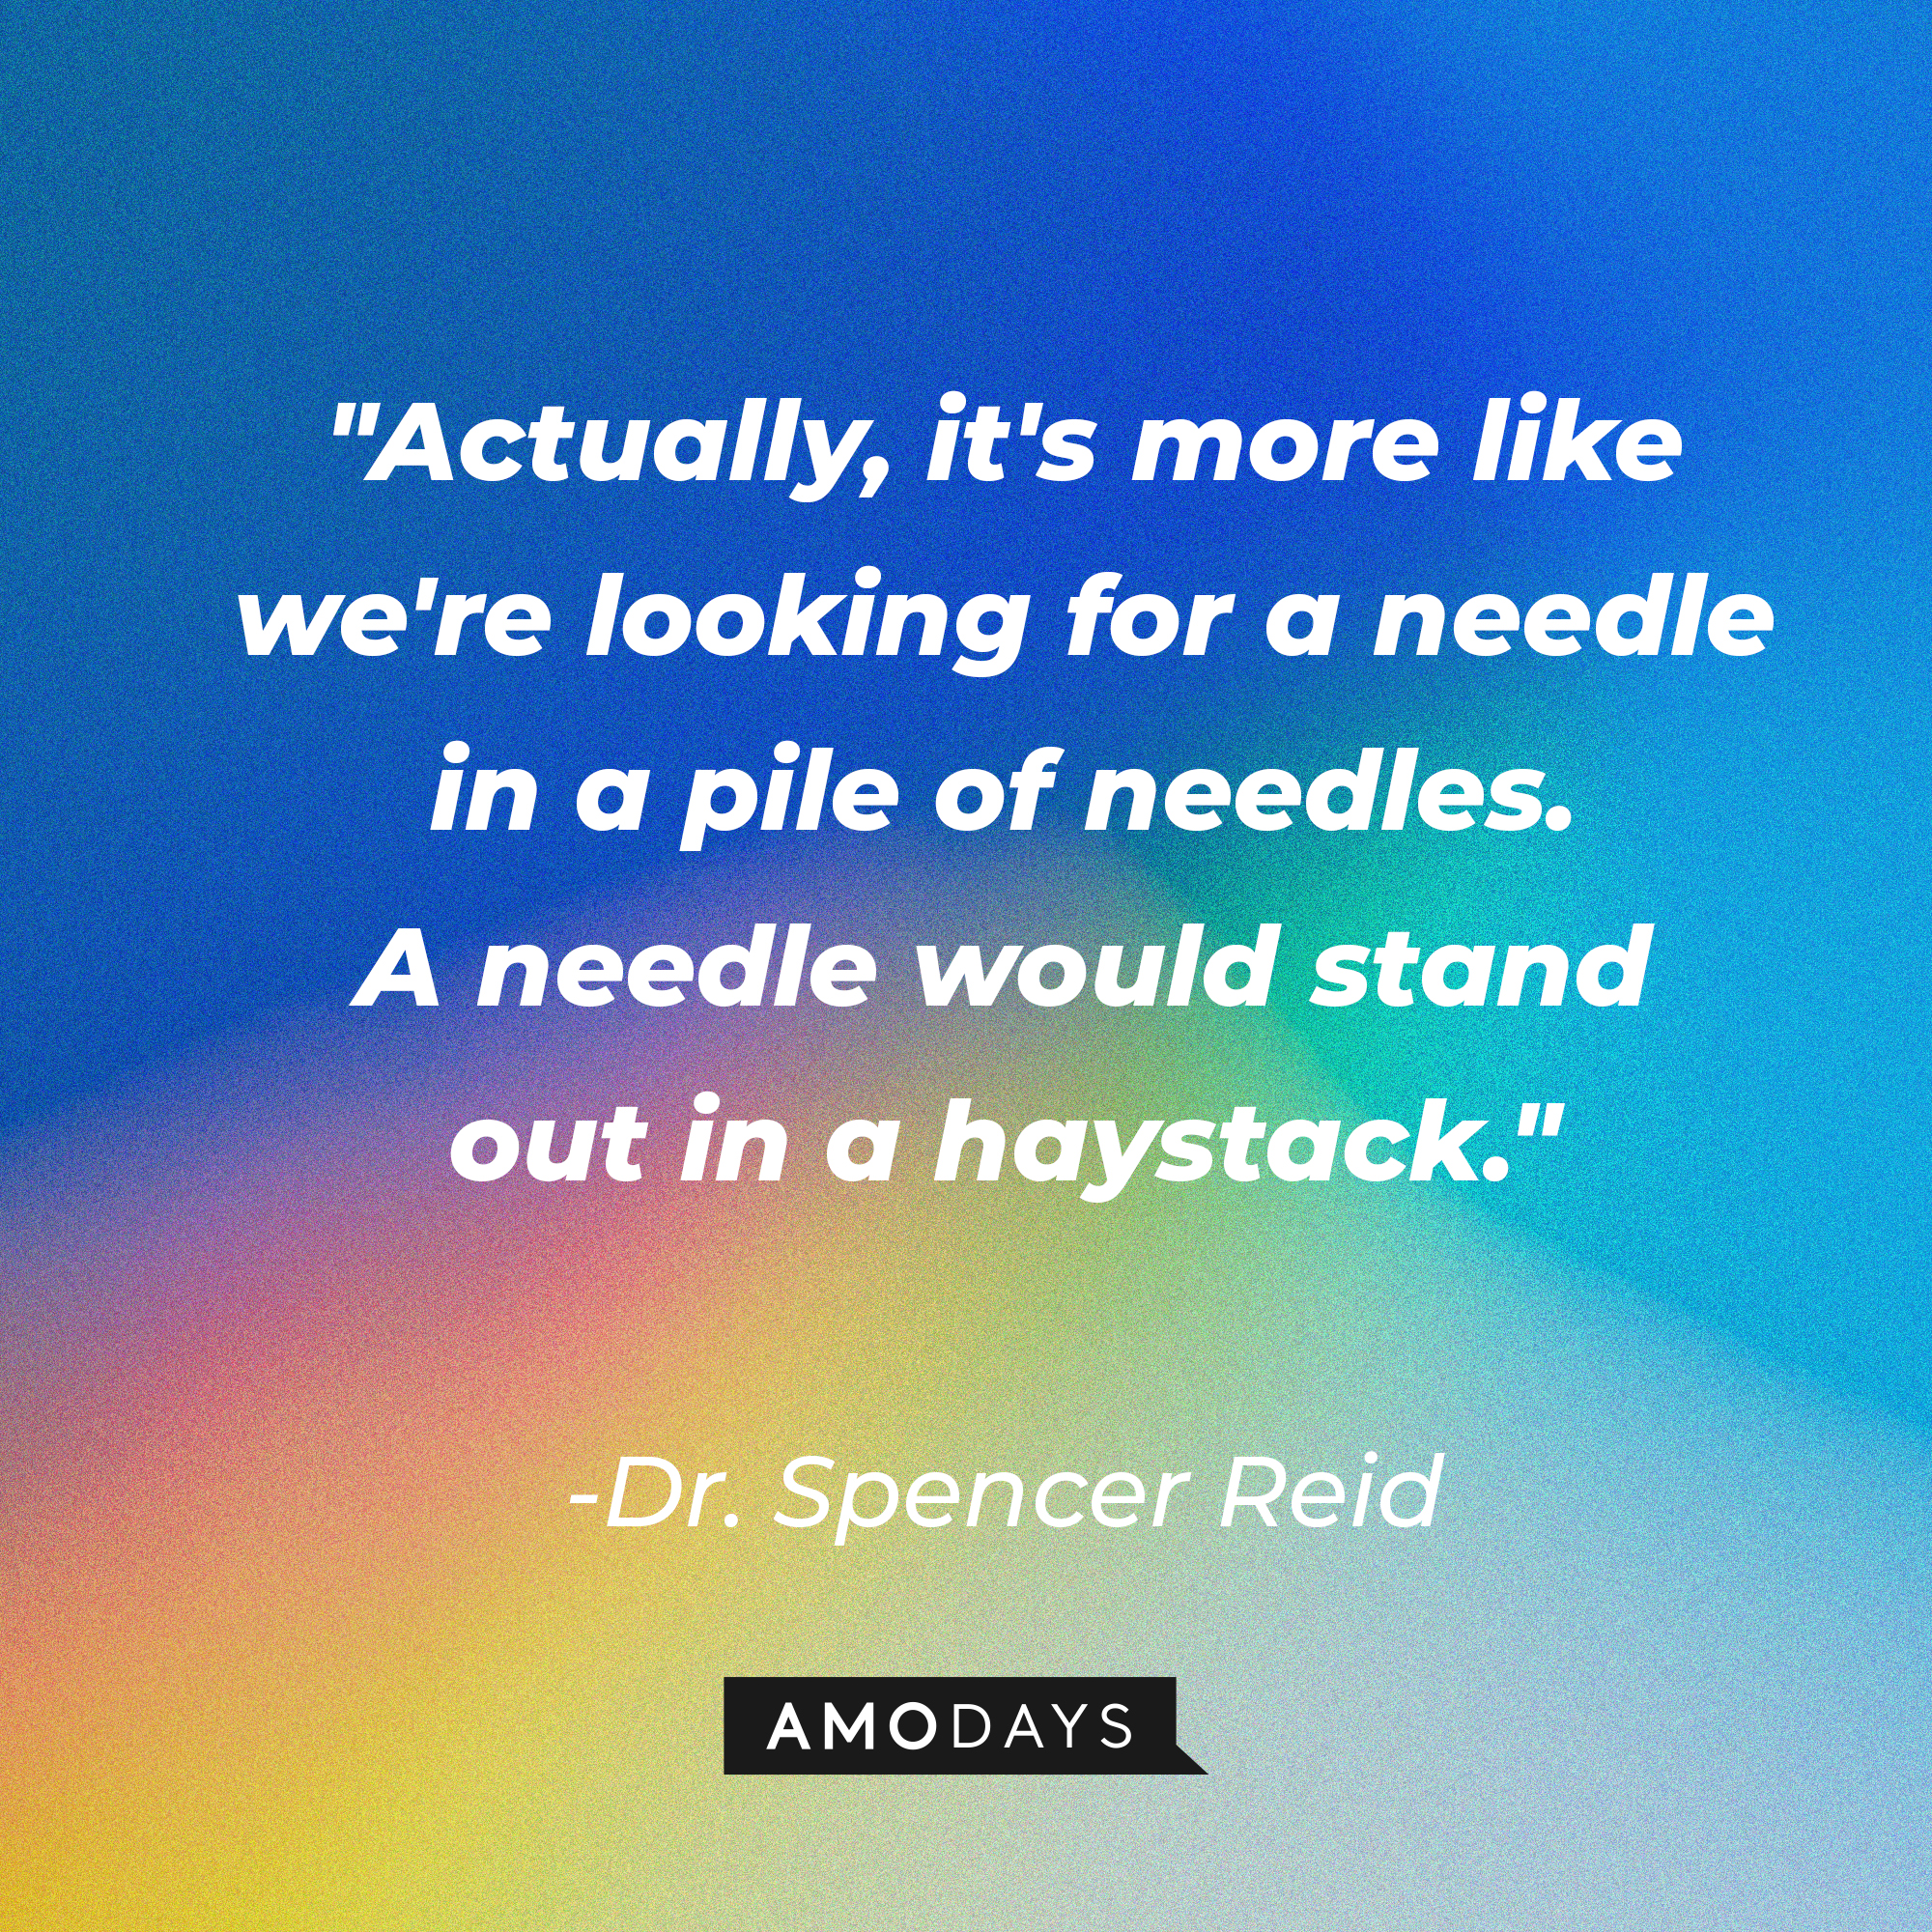 Dr. Spencer Reid's quote: "Actually, it's more like we're looking for a needle in a pile of needles. A needle would stand out in a haystack." | Source: AmoDays